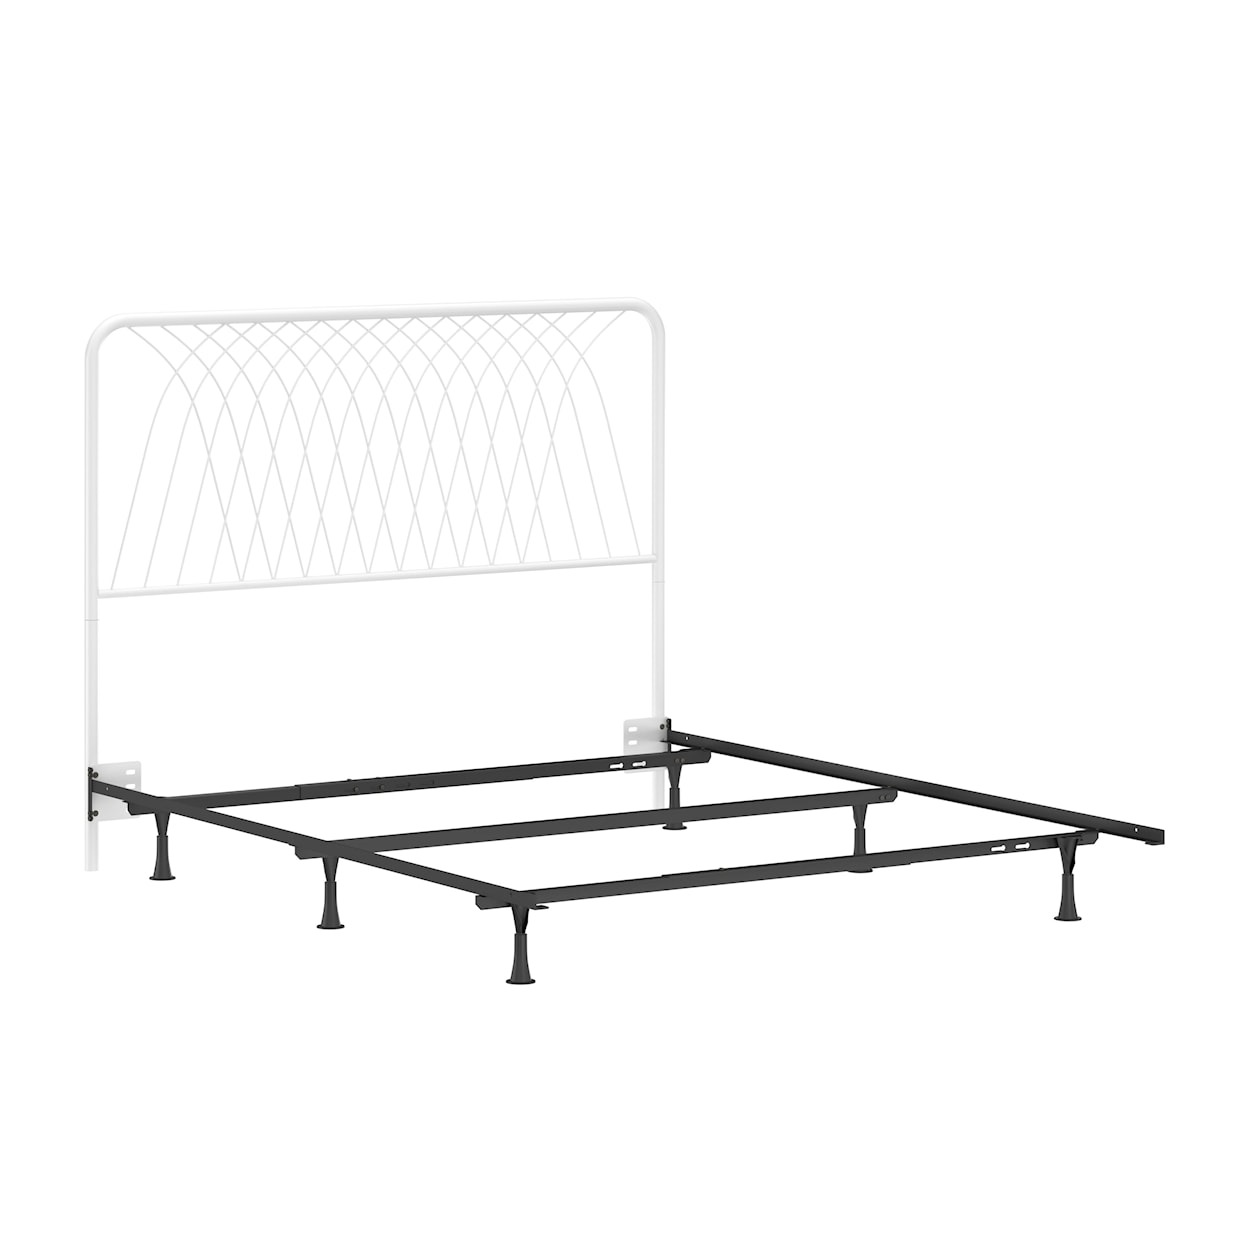 Hillsdale Alicia Full/Queen Bed Frame